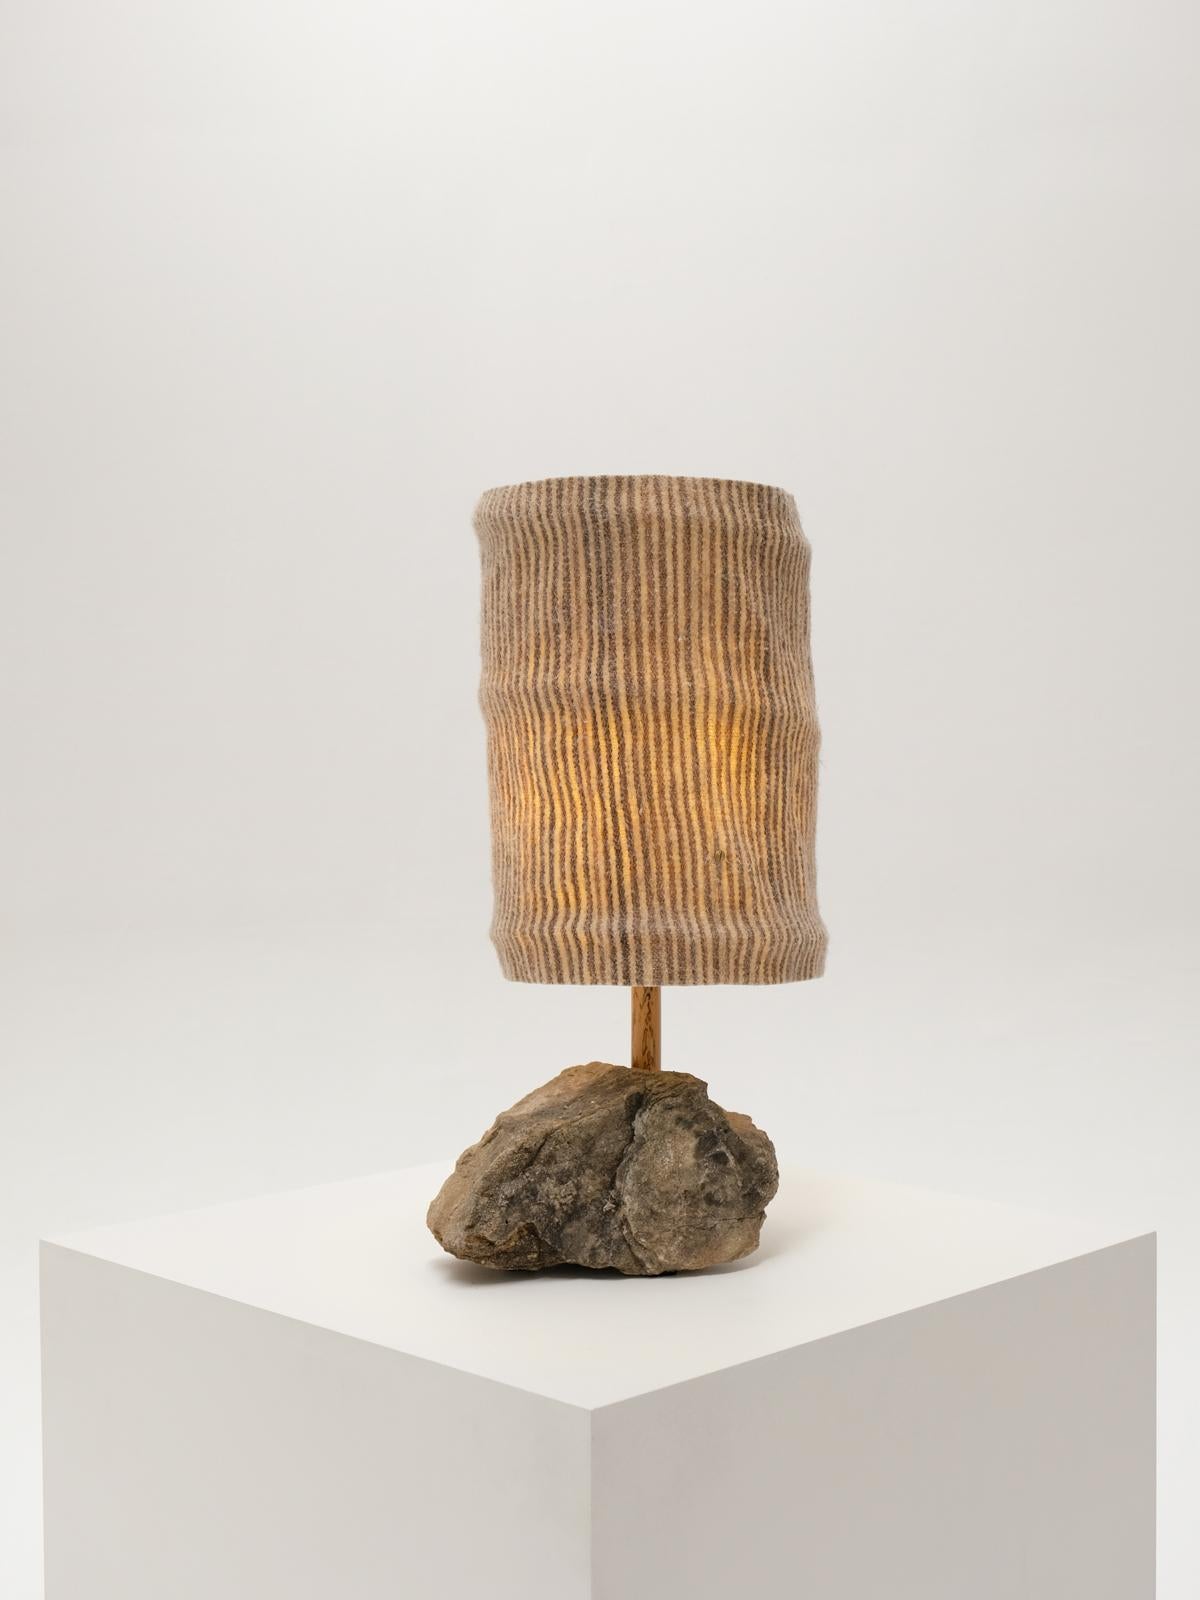 Contemporary Hjra Table Lamp, Handspun and Handwoven wool lampshade, Made of Rock and Reed For Sale